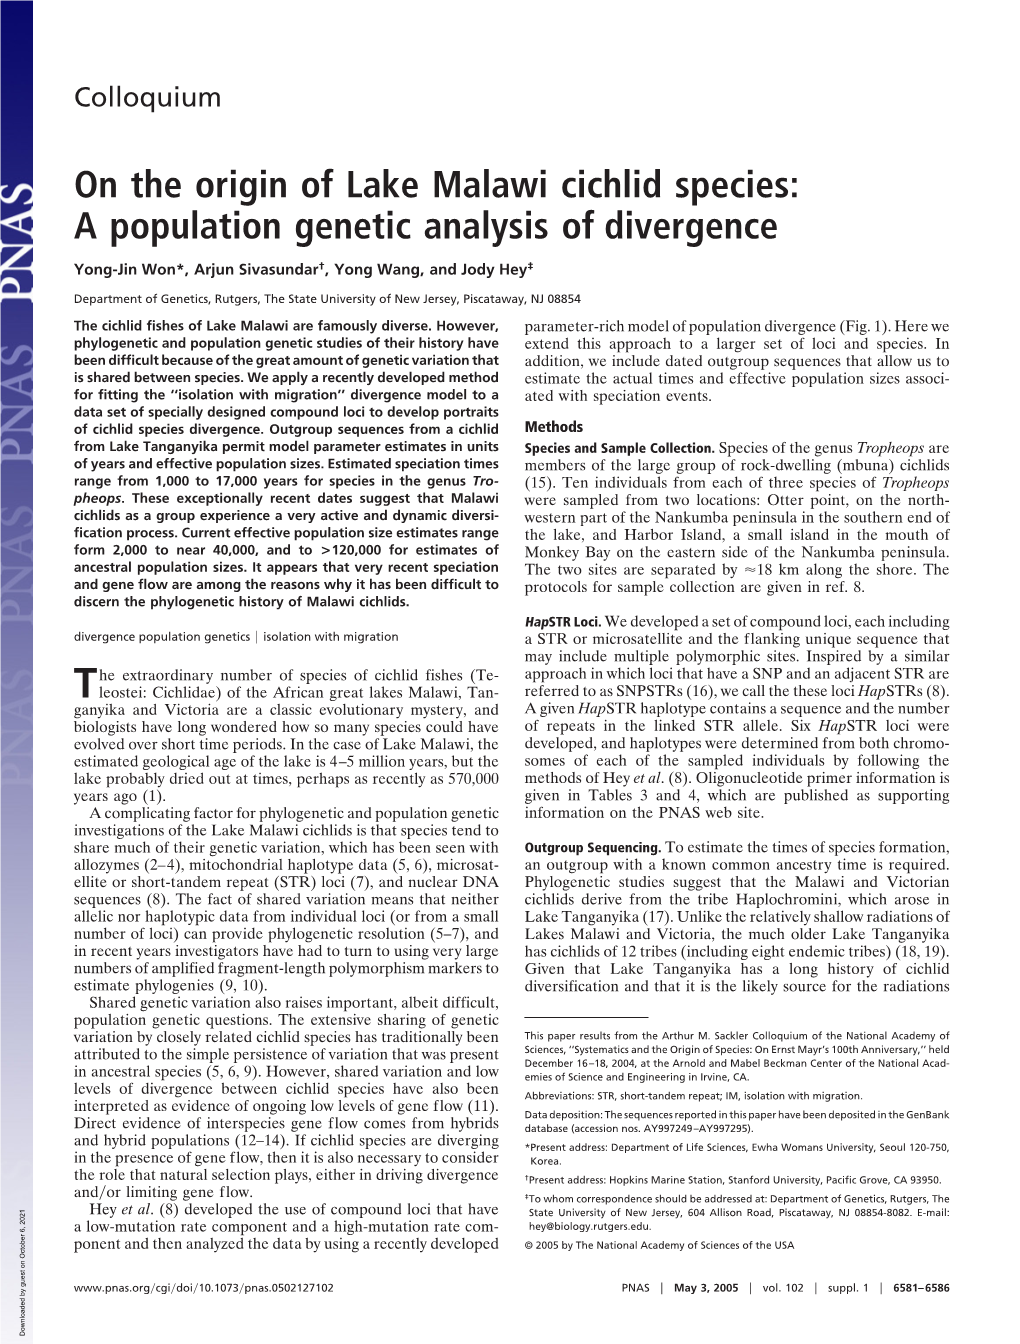 On the Origin of Lake Malawi Cichlid Species: a Population Genetic Analysis of Divergence